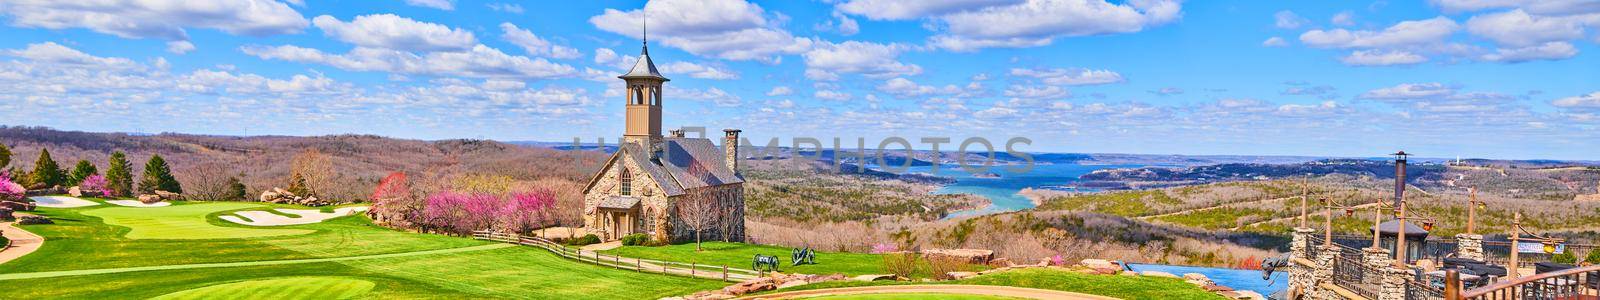 Stunning panorama of golf course and church on hills next to lakes in early spring by njproductions